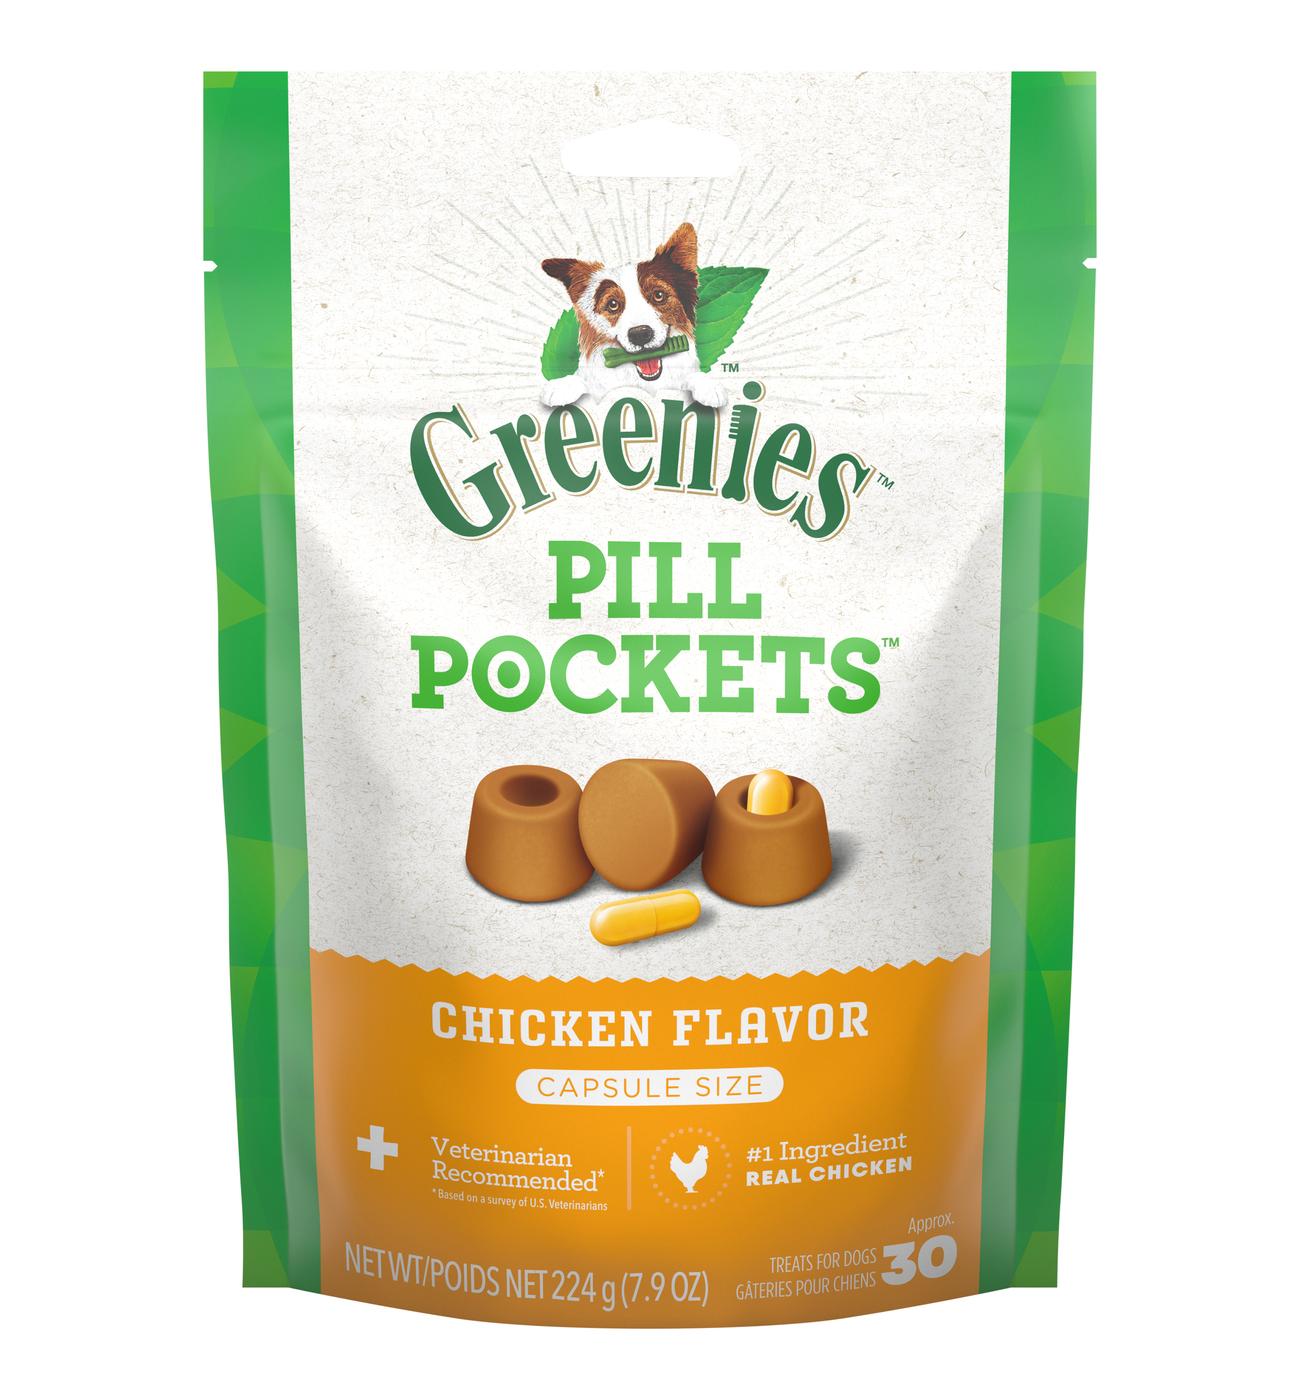 GREENIES PILL POCKETS for Dogs Capsule Size - Chicken Flavor; image 1 of 5